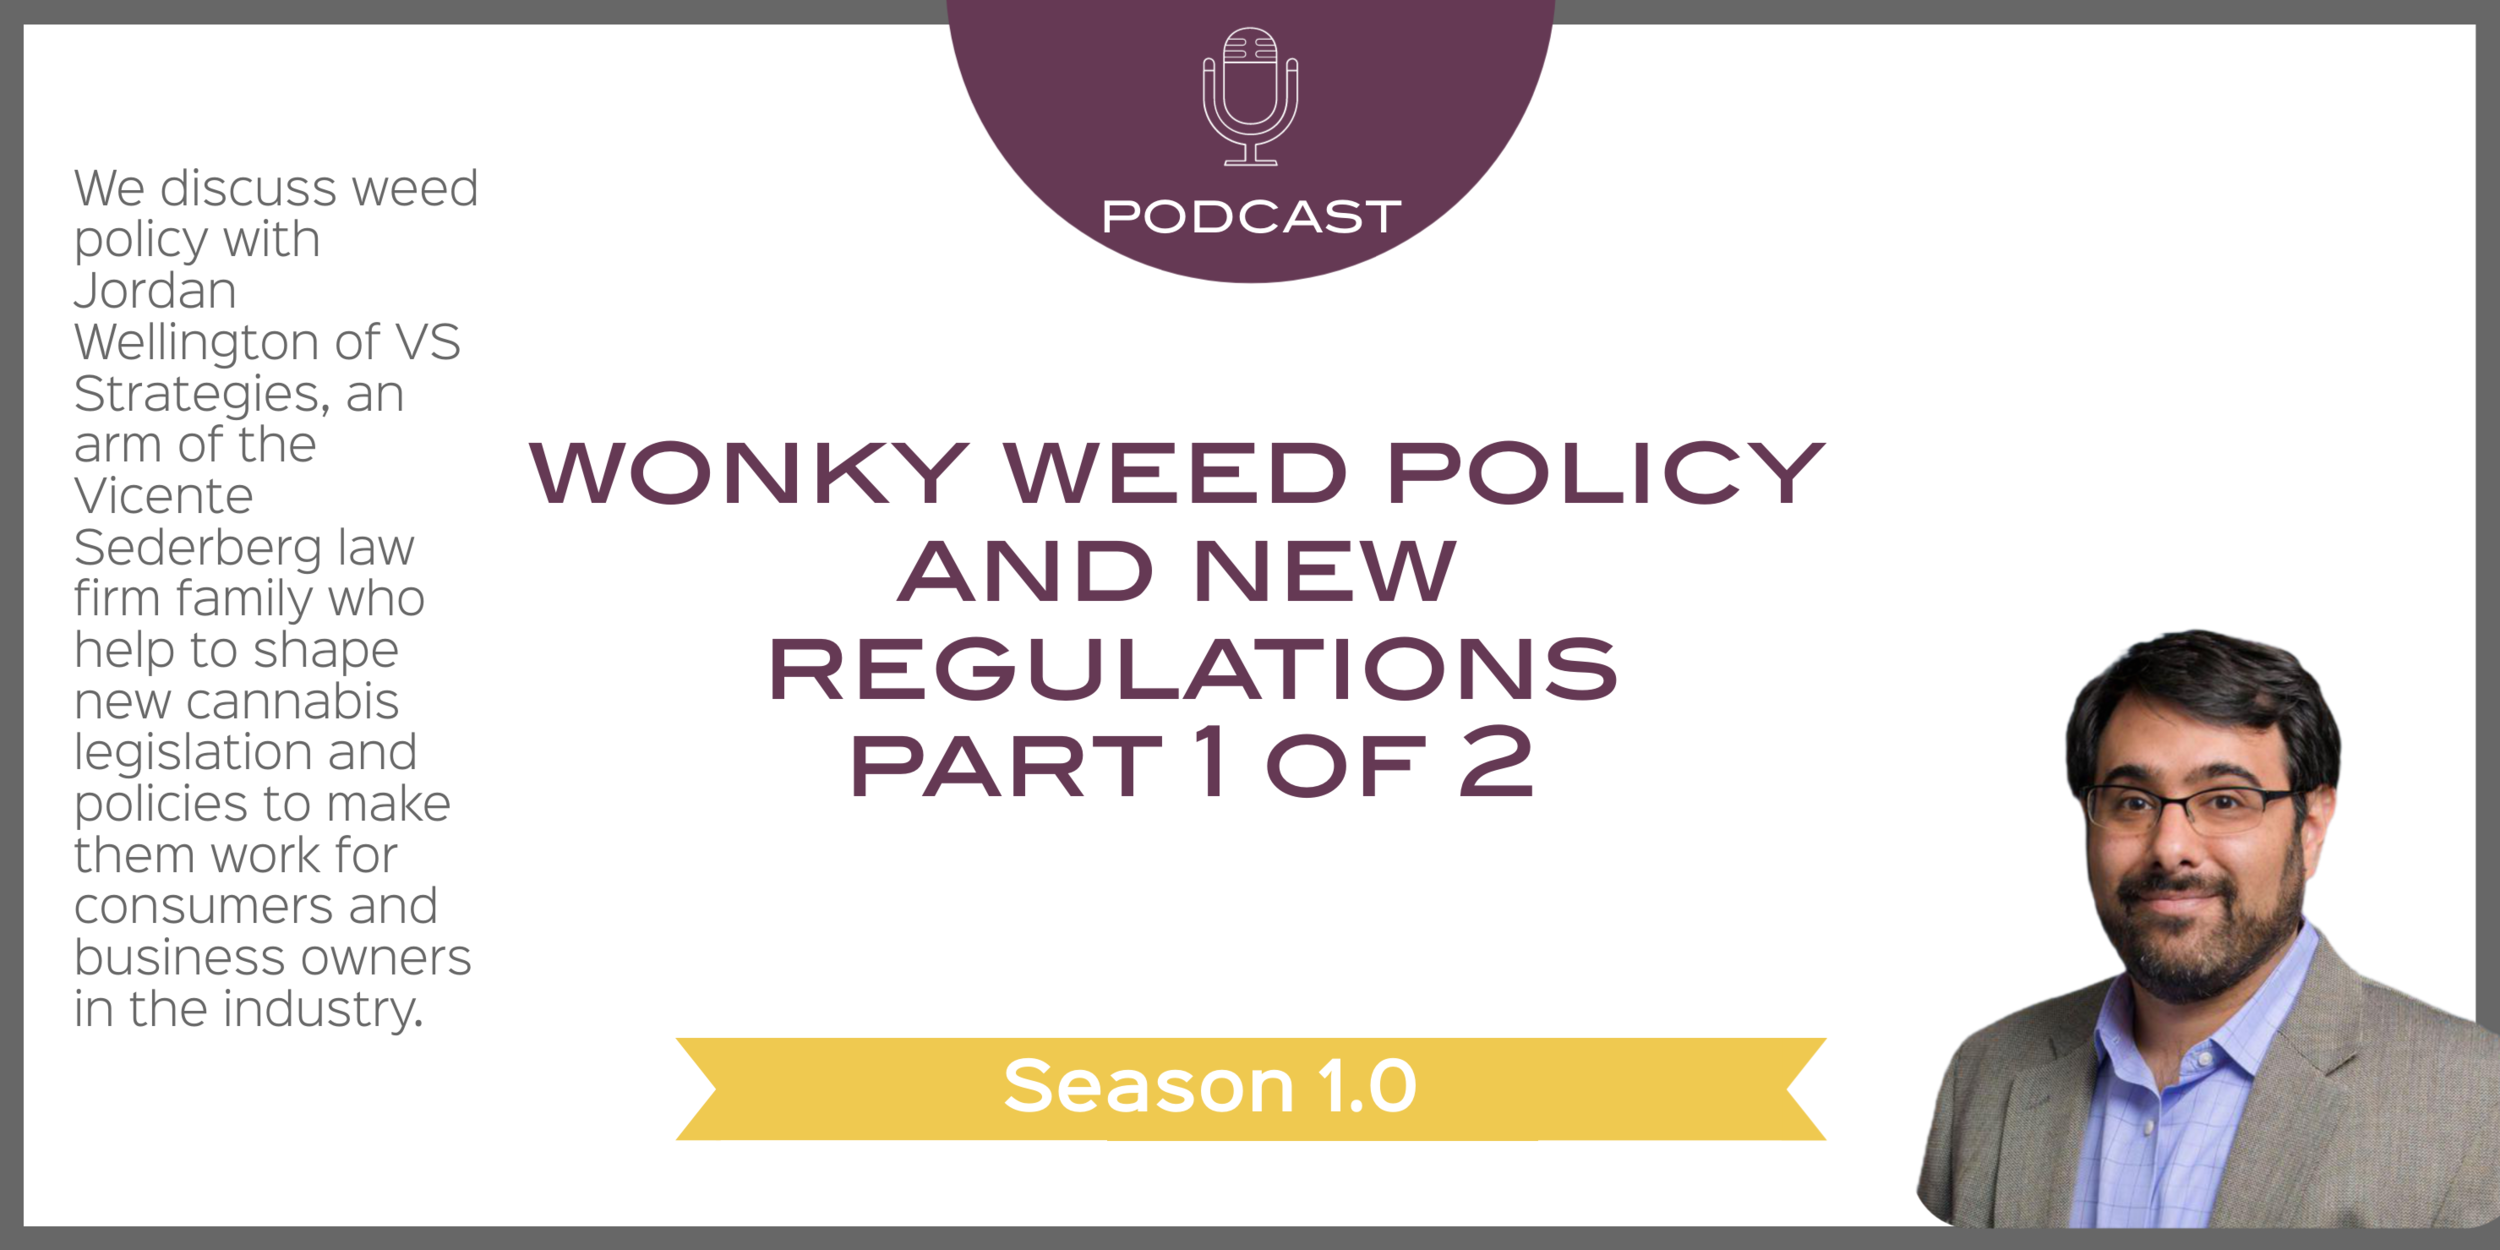 Wonky Weed Policy and New Regulations with Jordan Wellington of VS Strategies